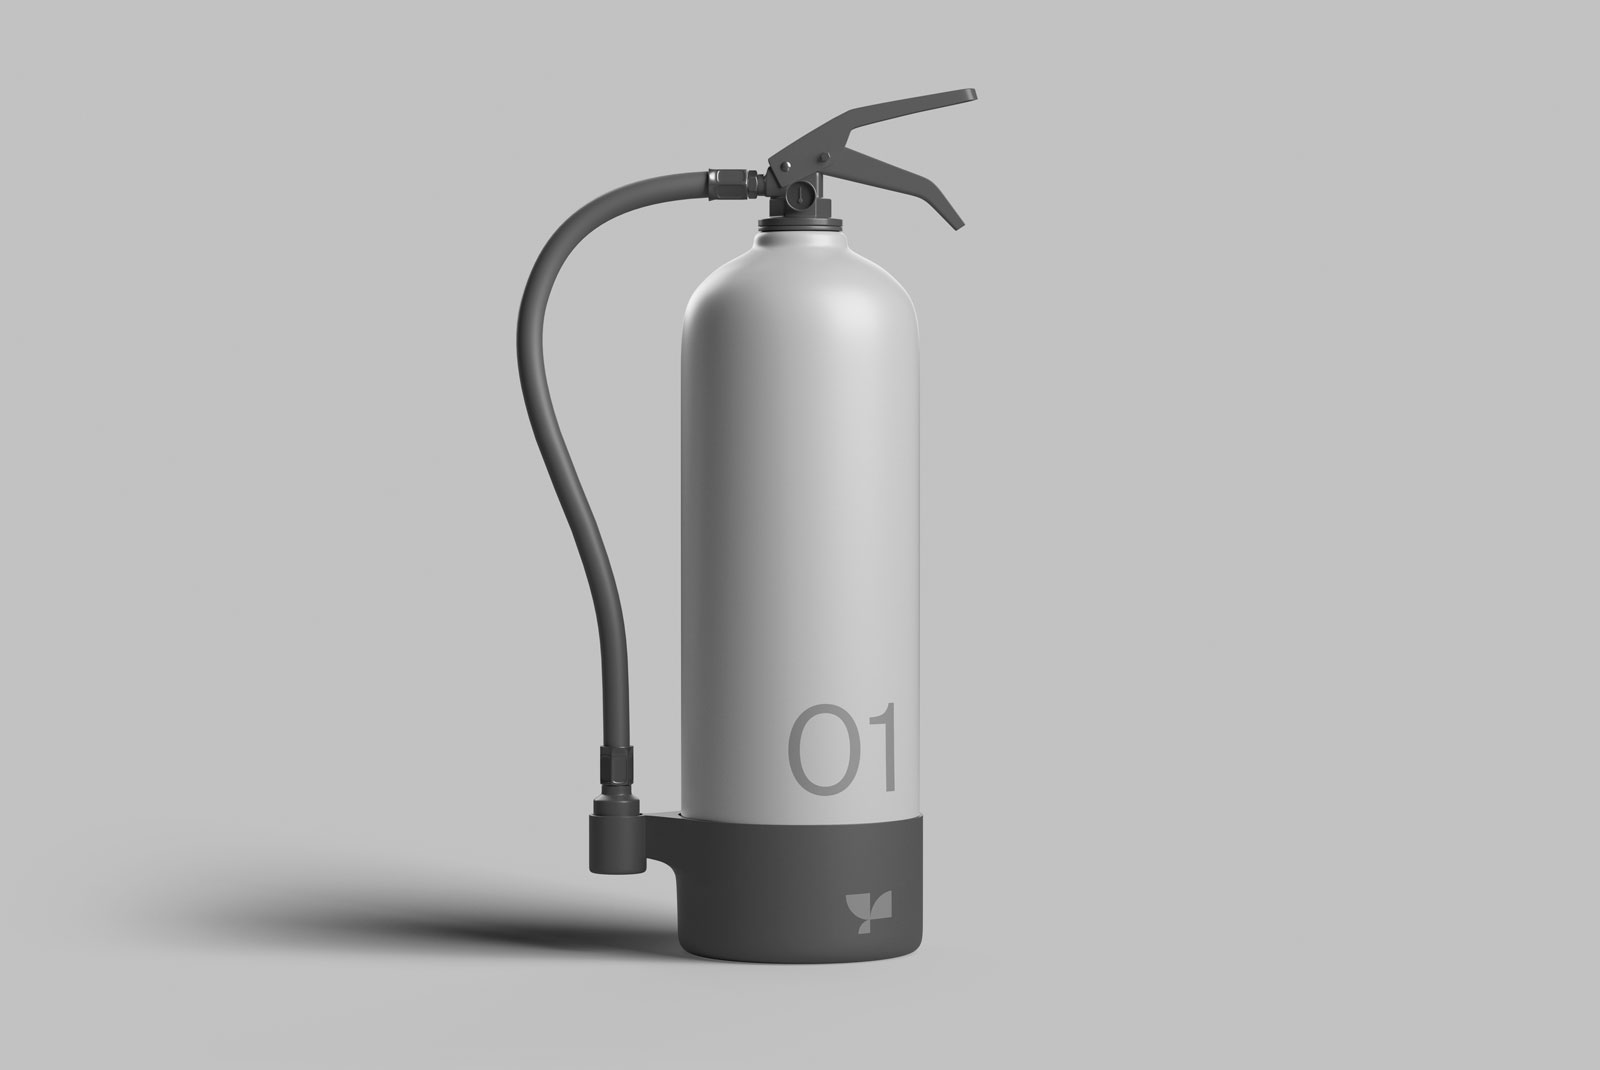 3D rendered fire extinguisher mockup with a sleek design on a plain background, ideal for product visualization and design presentations.